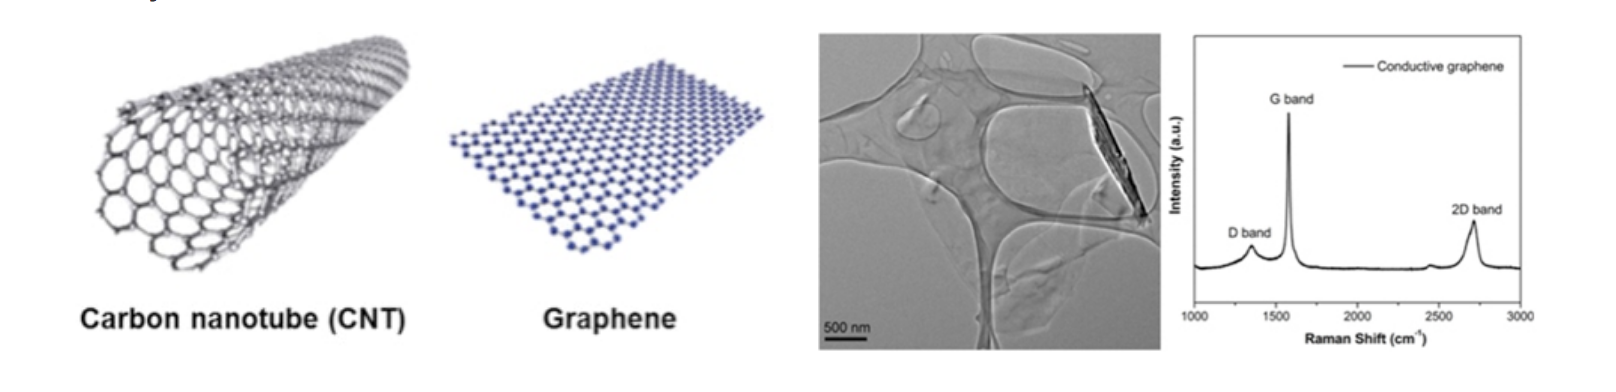 Graphene-and-Carbon-Nanotube-Launched-by-Creative-Diagnostics-for-Bio-applications